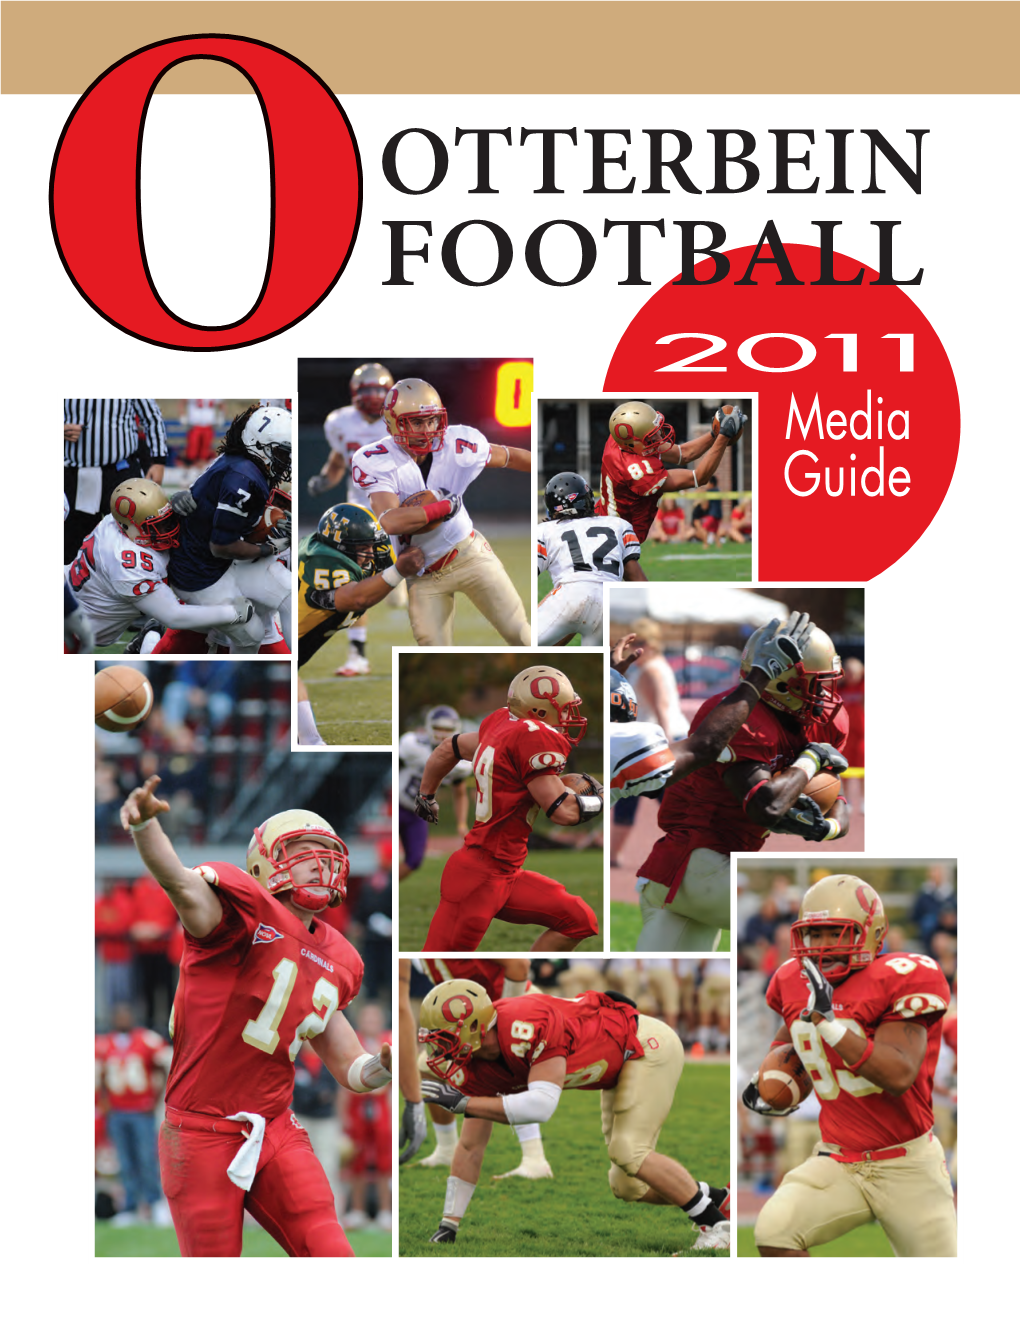 Otterbein Football 2 011 Media Guide Message from the President